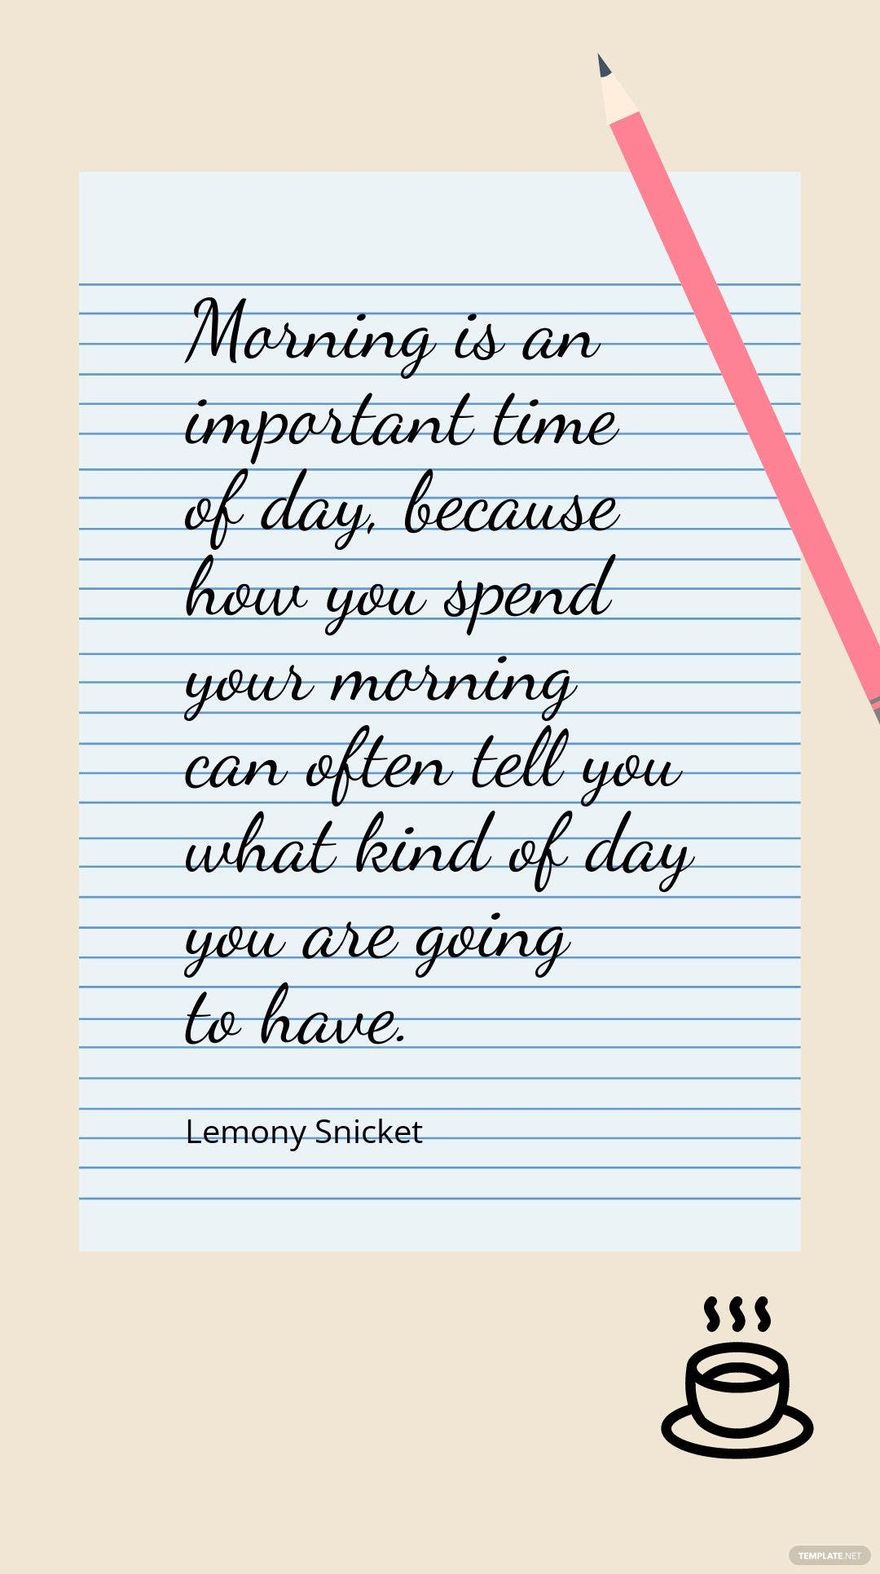 Lemony Snicket - Morning is an important time of day, because how you spend your morning can often tell you what kind of day you are going to have.